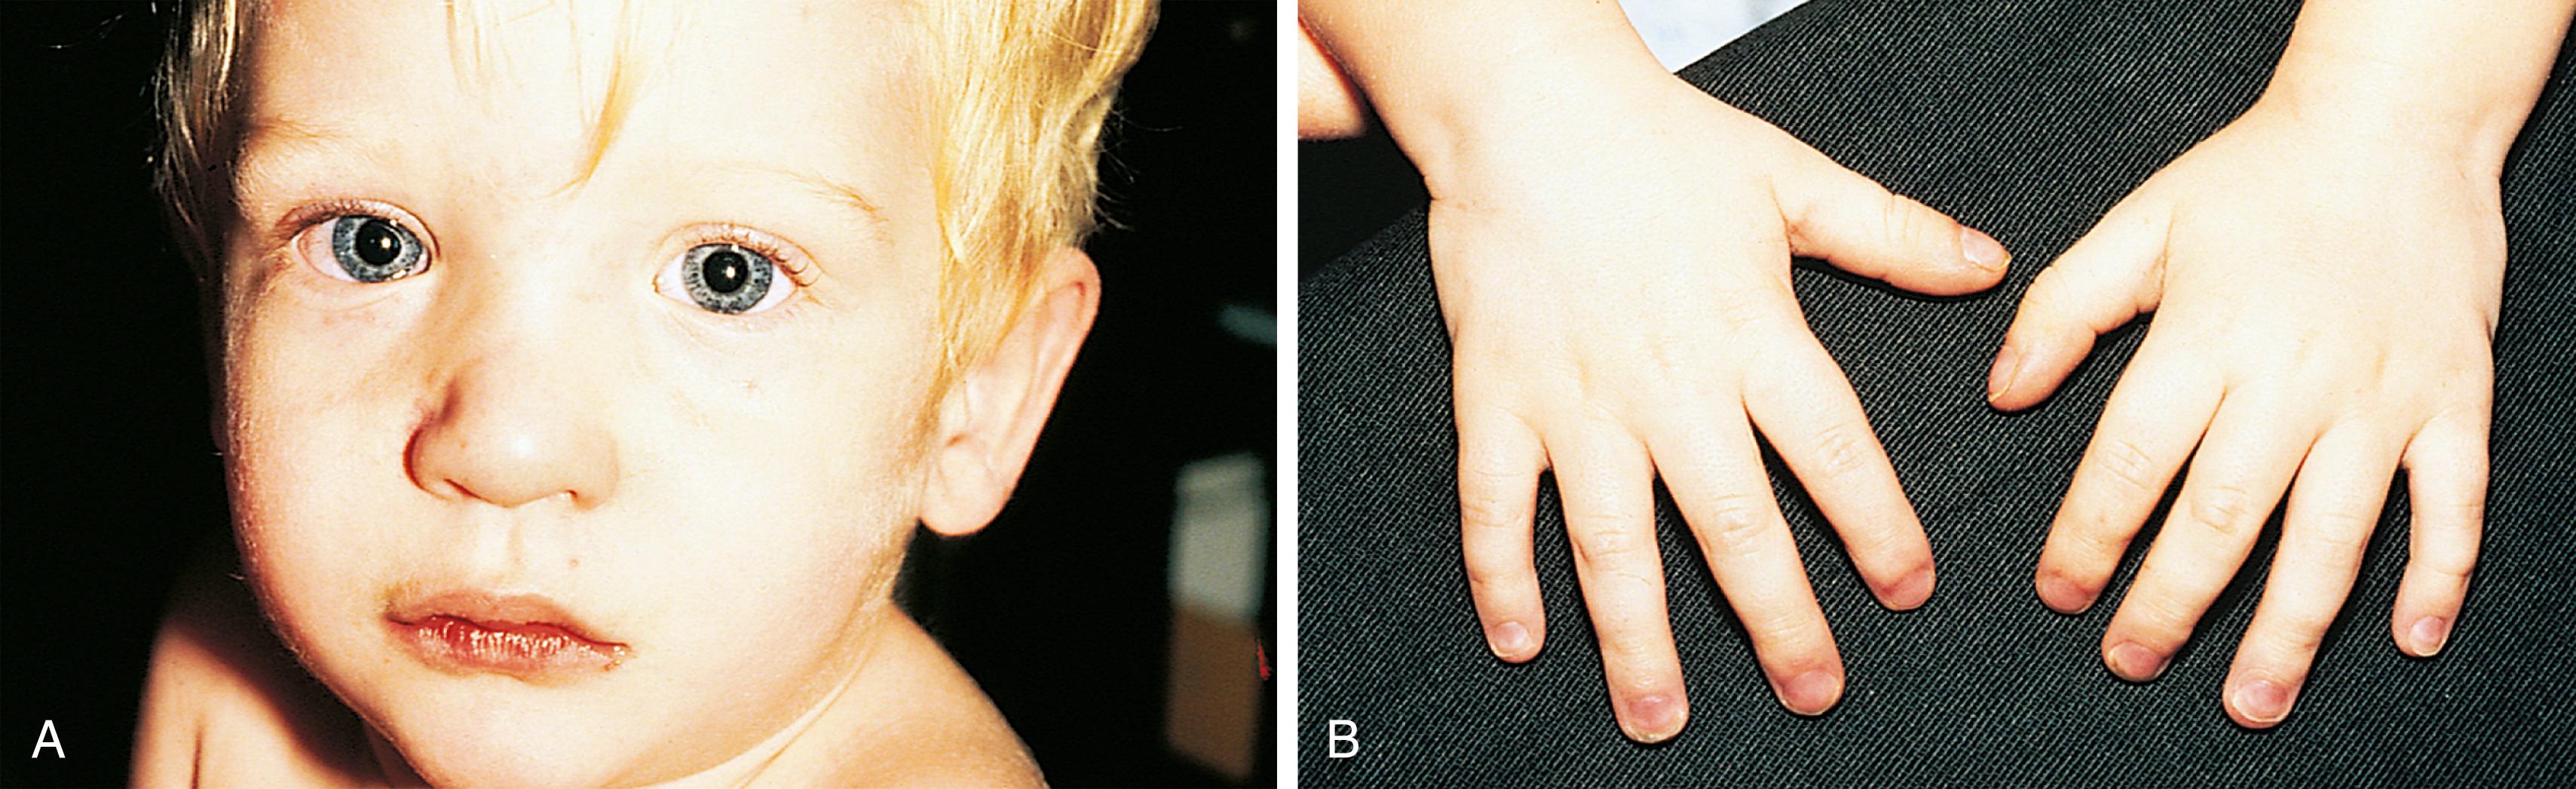 Fig. 5.2, Moderate cyanosis. This child demonstrates moderate cyanosis of the lips (A) and nails (B). Note also the reddish discoloration of the eyes resulting from conjunctival suffusion.